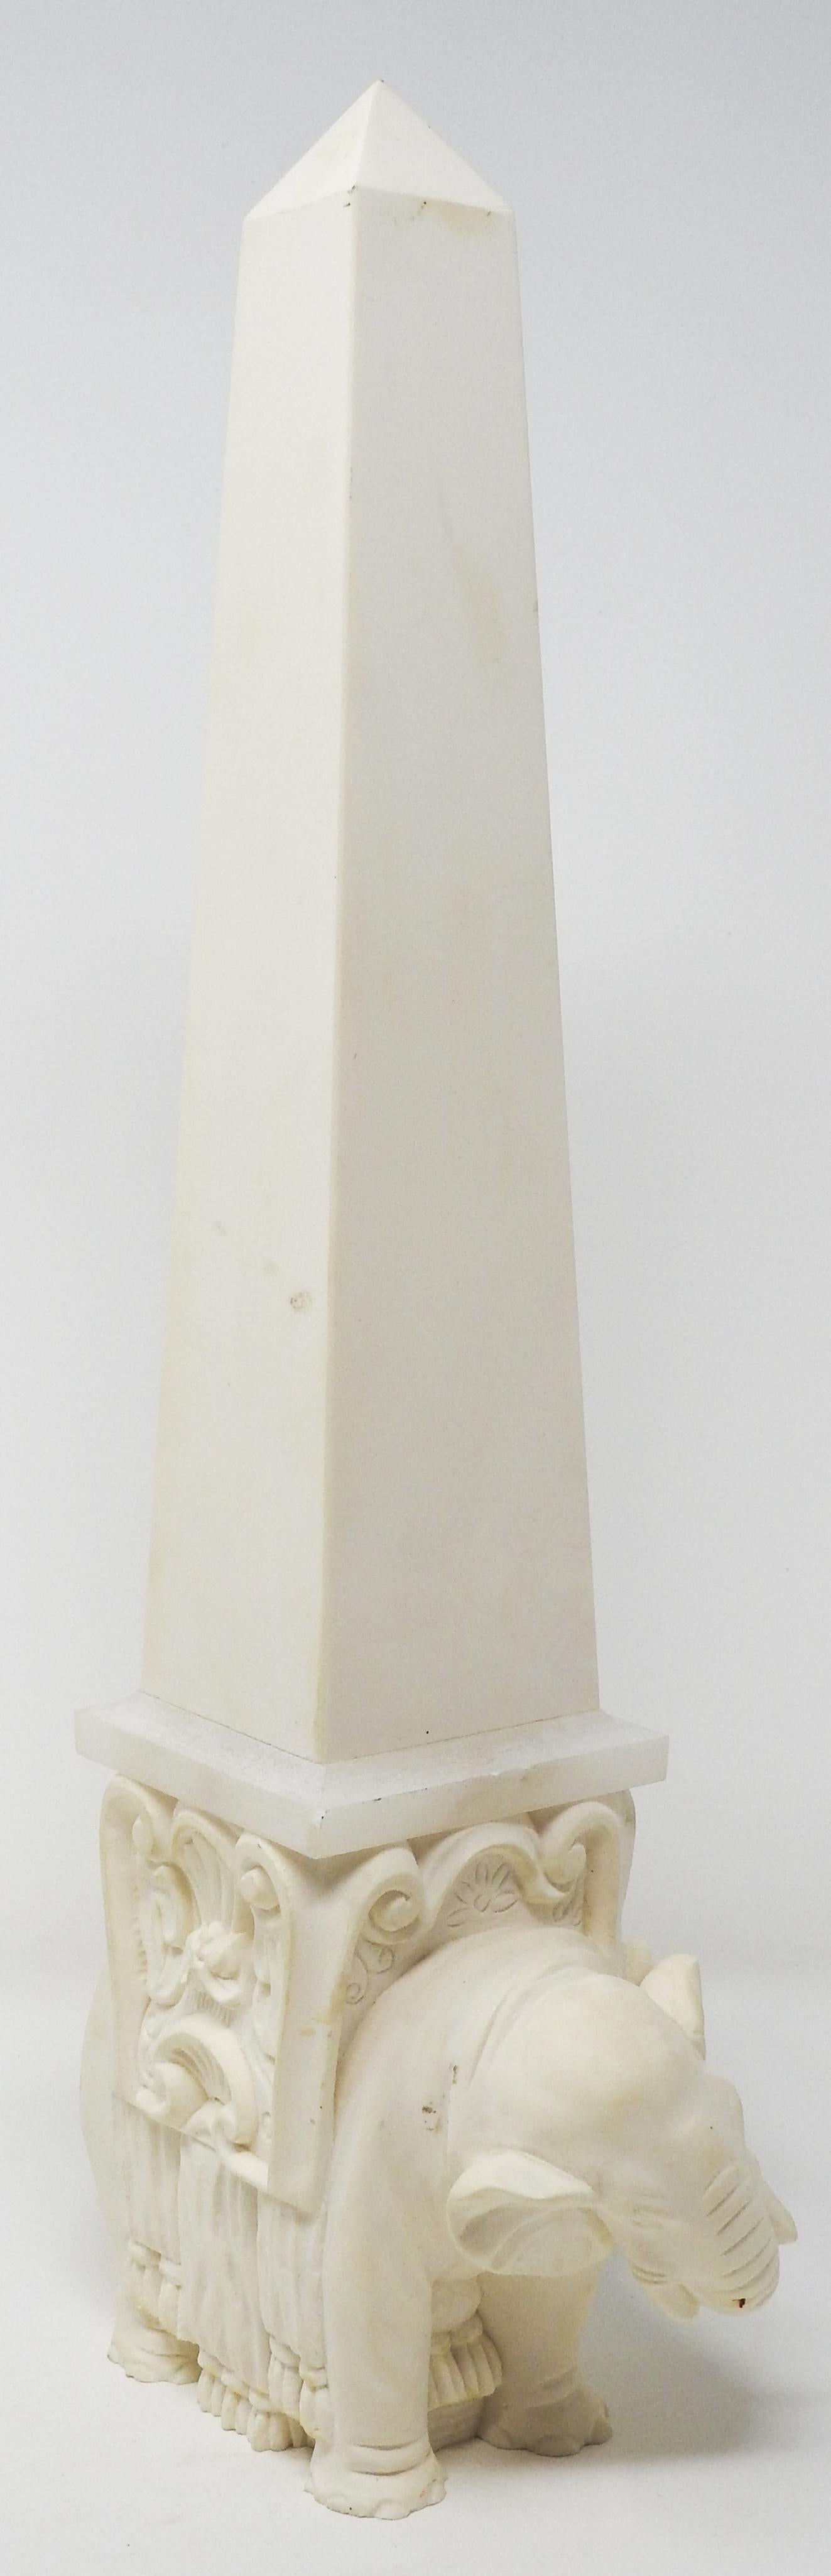 White Ceramic and Glass Elephant Obelisk, Vintage In Fair Condition For Sale In Cookeville, TN